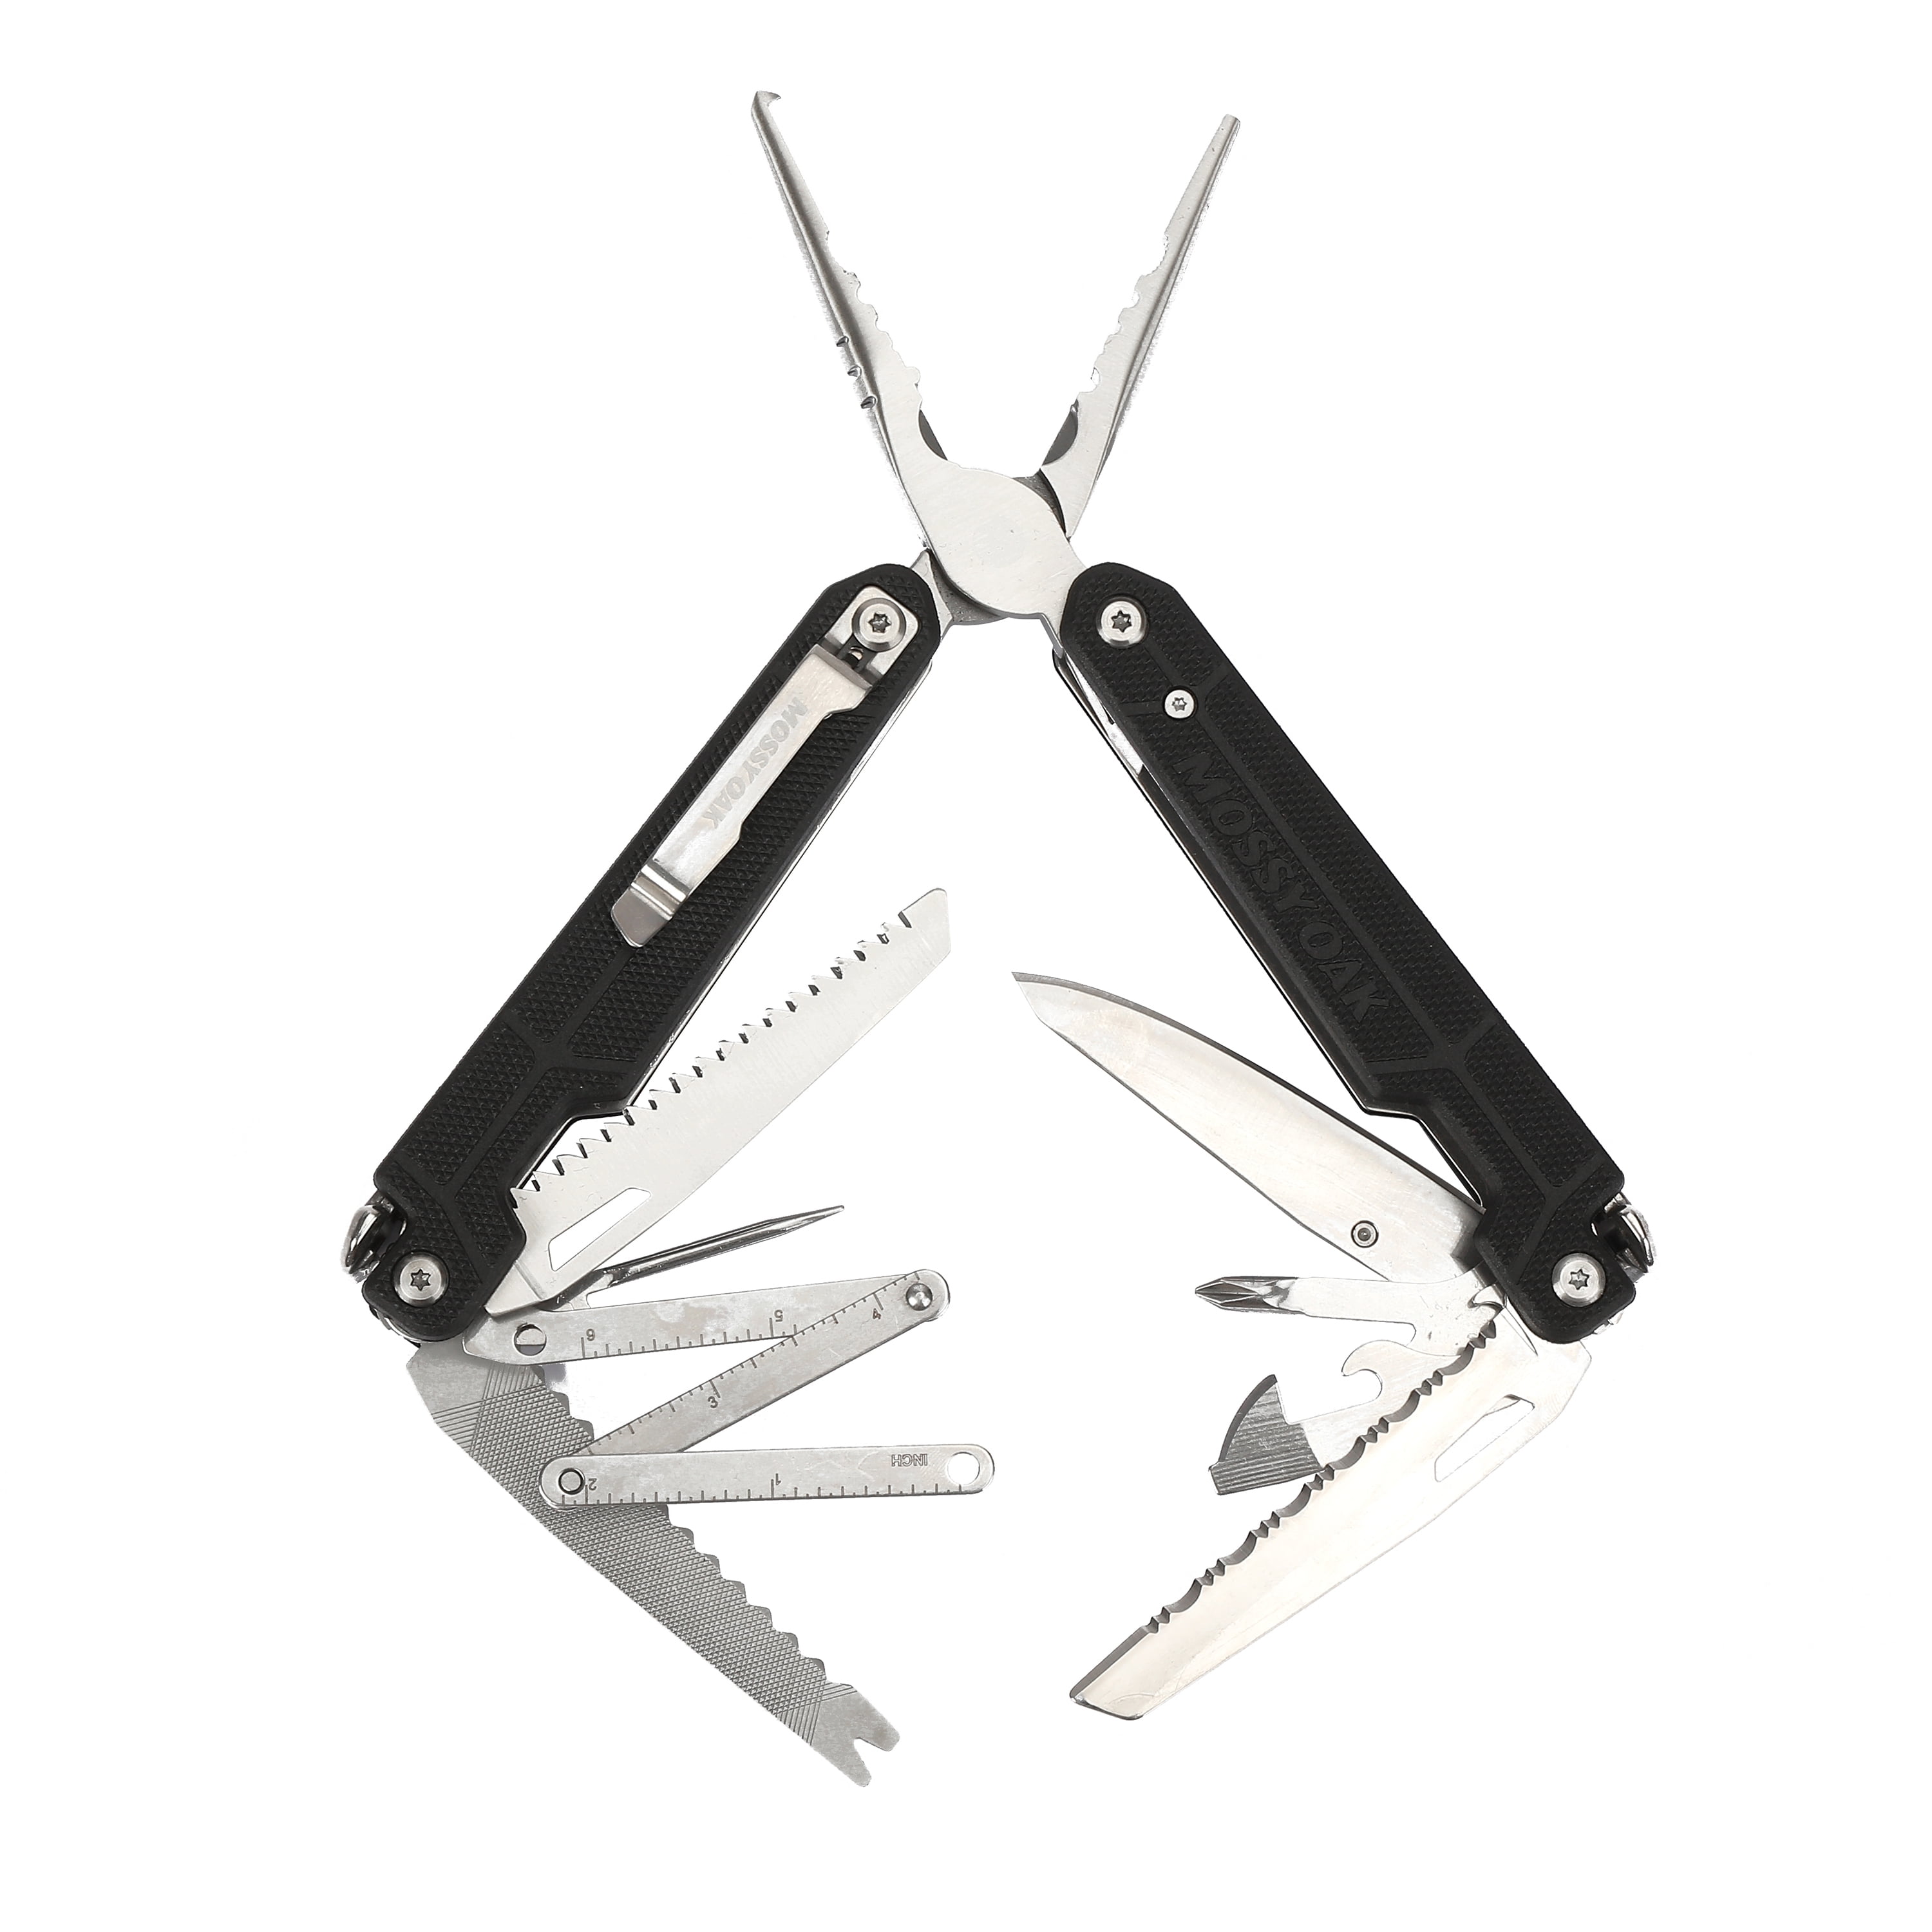 MOSSY OAK Multitool 12 In 1 Multi Pliers Wire Cutter Multifunction Tools  Survival Camping Tool Fishing 211028243z From Mmhgg, $64.36